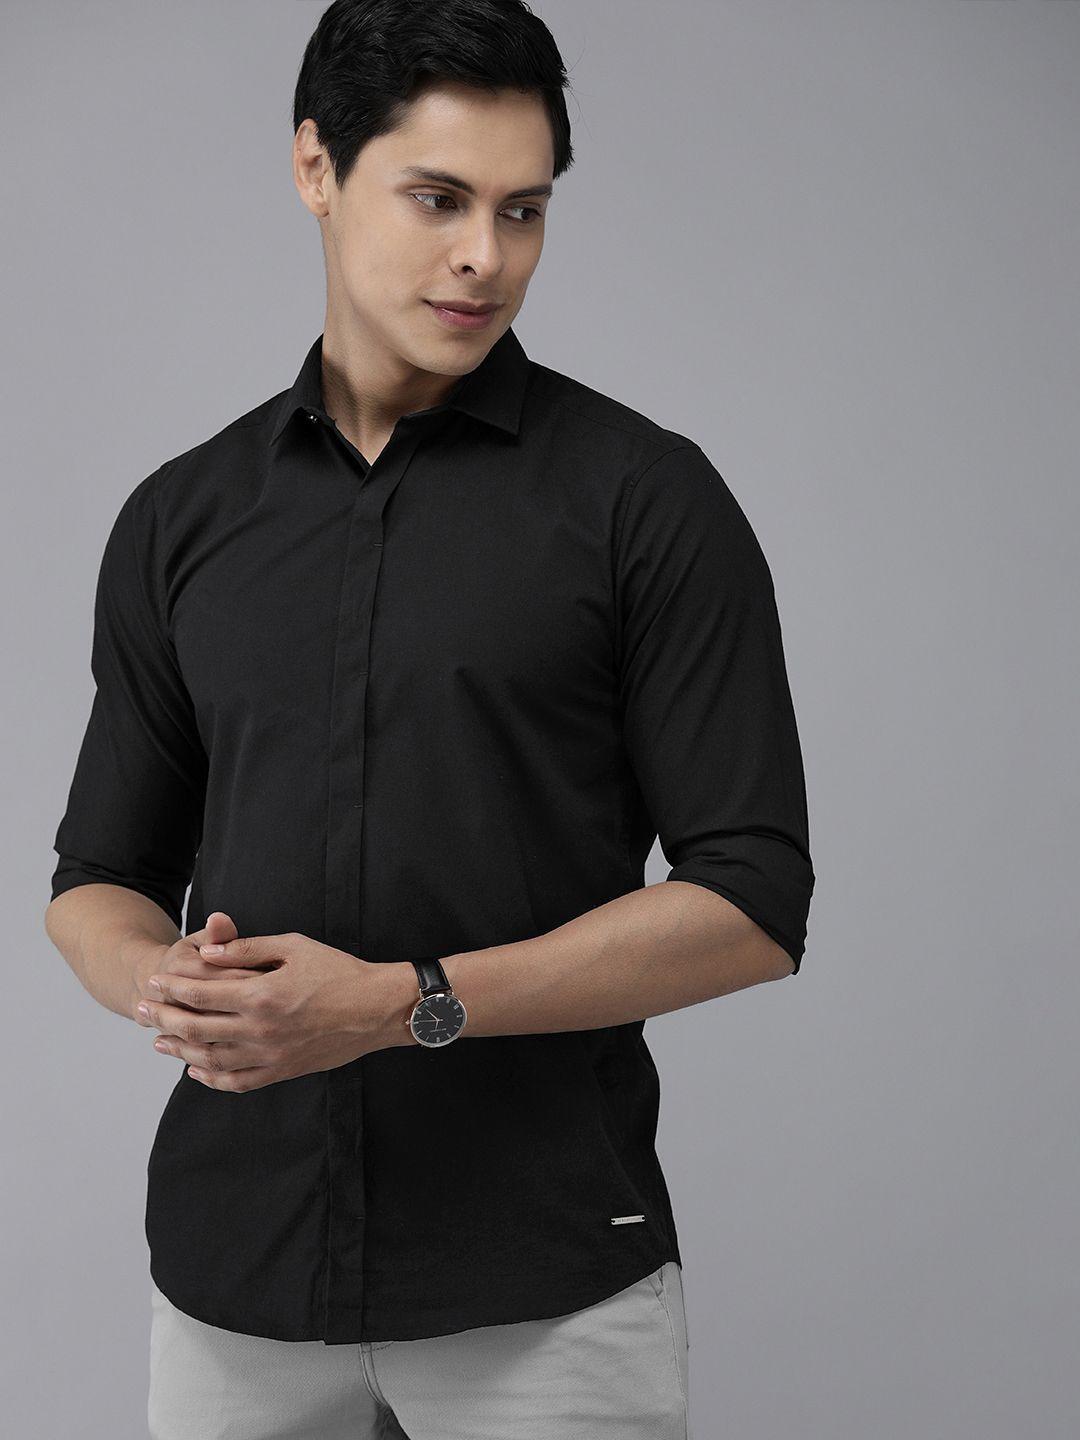 the-bear-house-men-black-solid-slim-fit-concealed-placket-casual-shirt